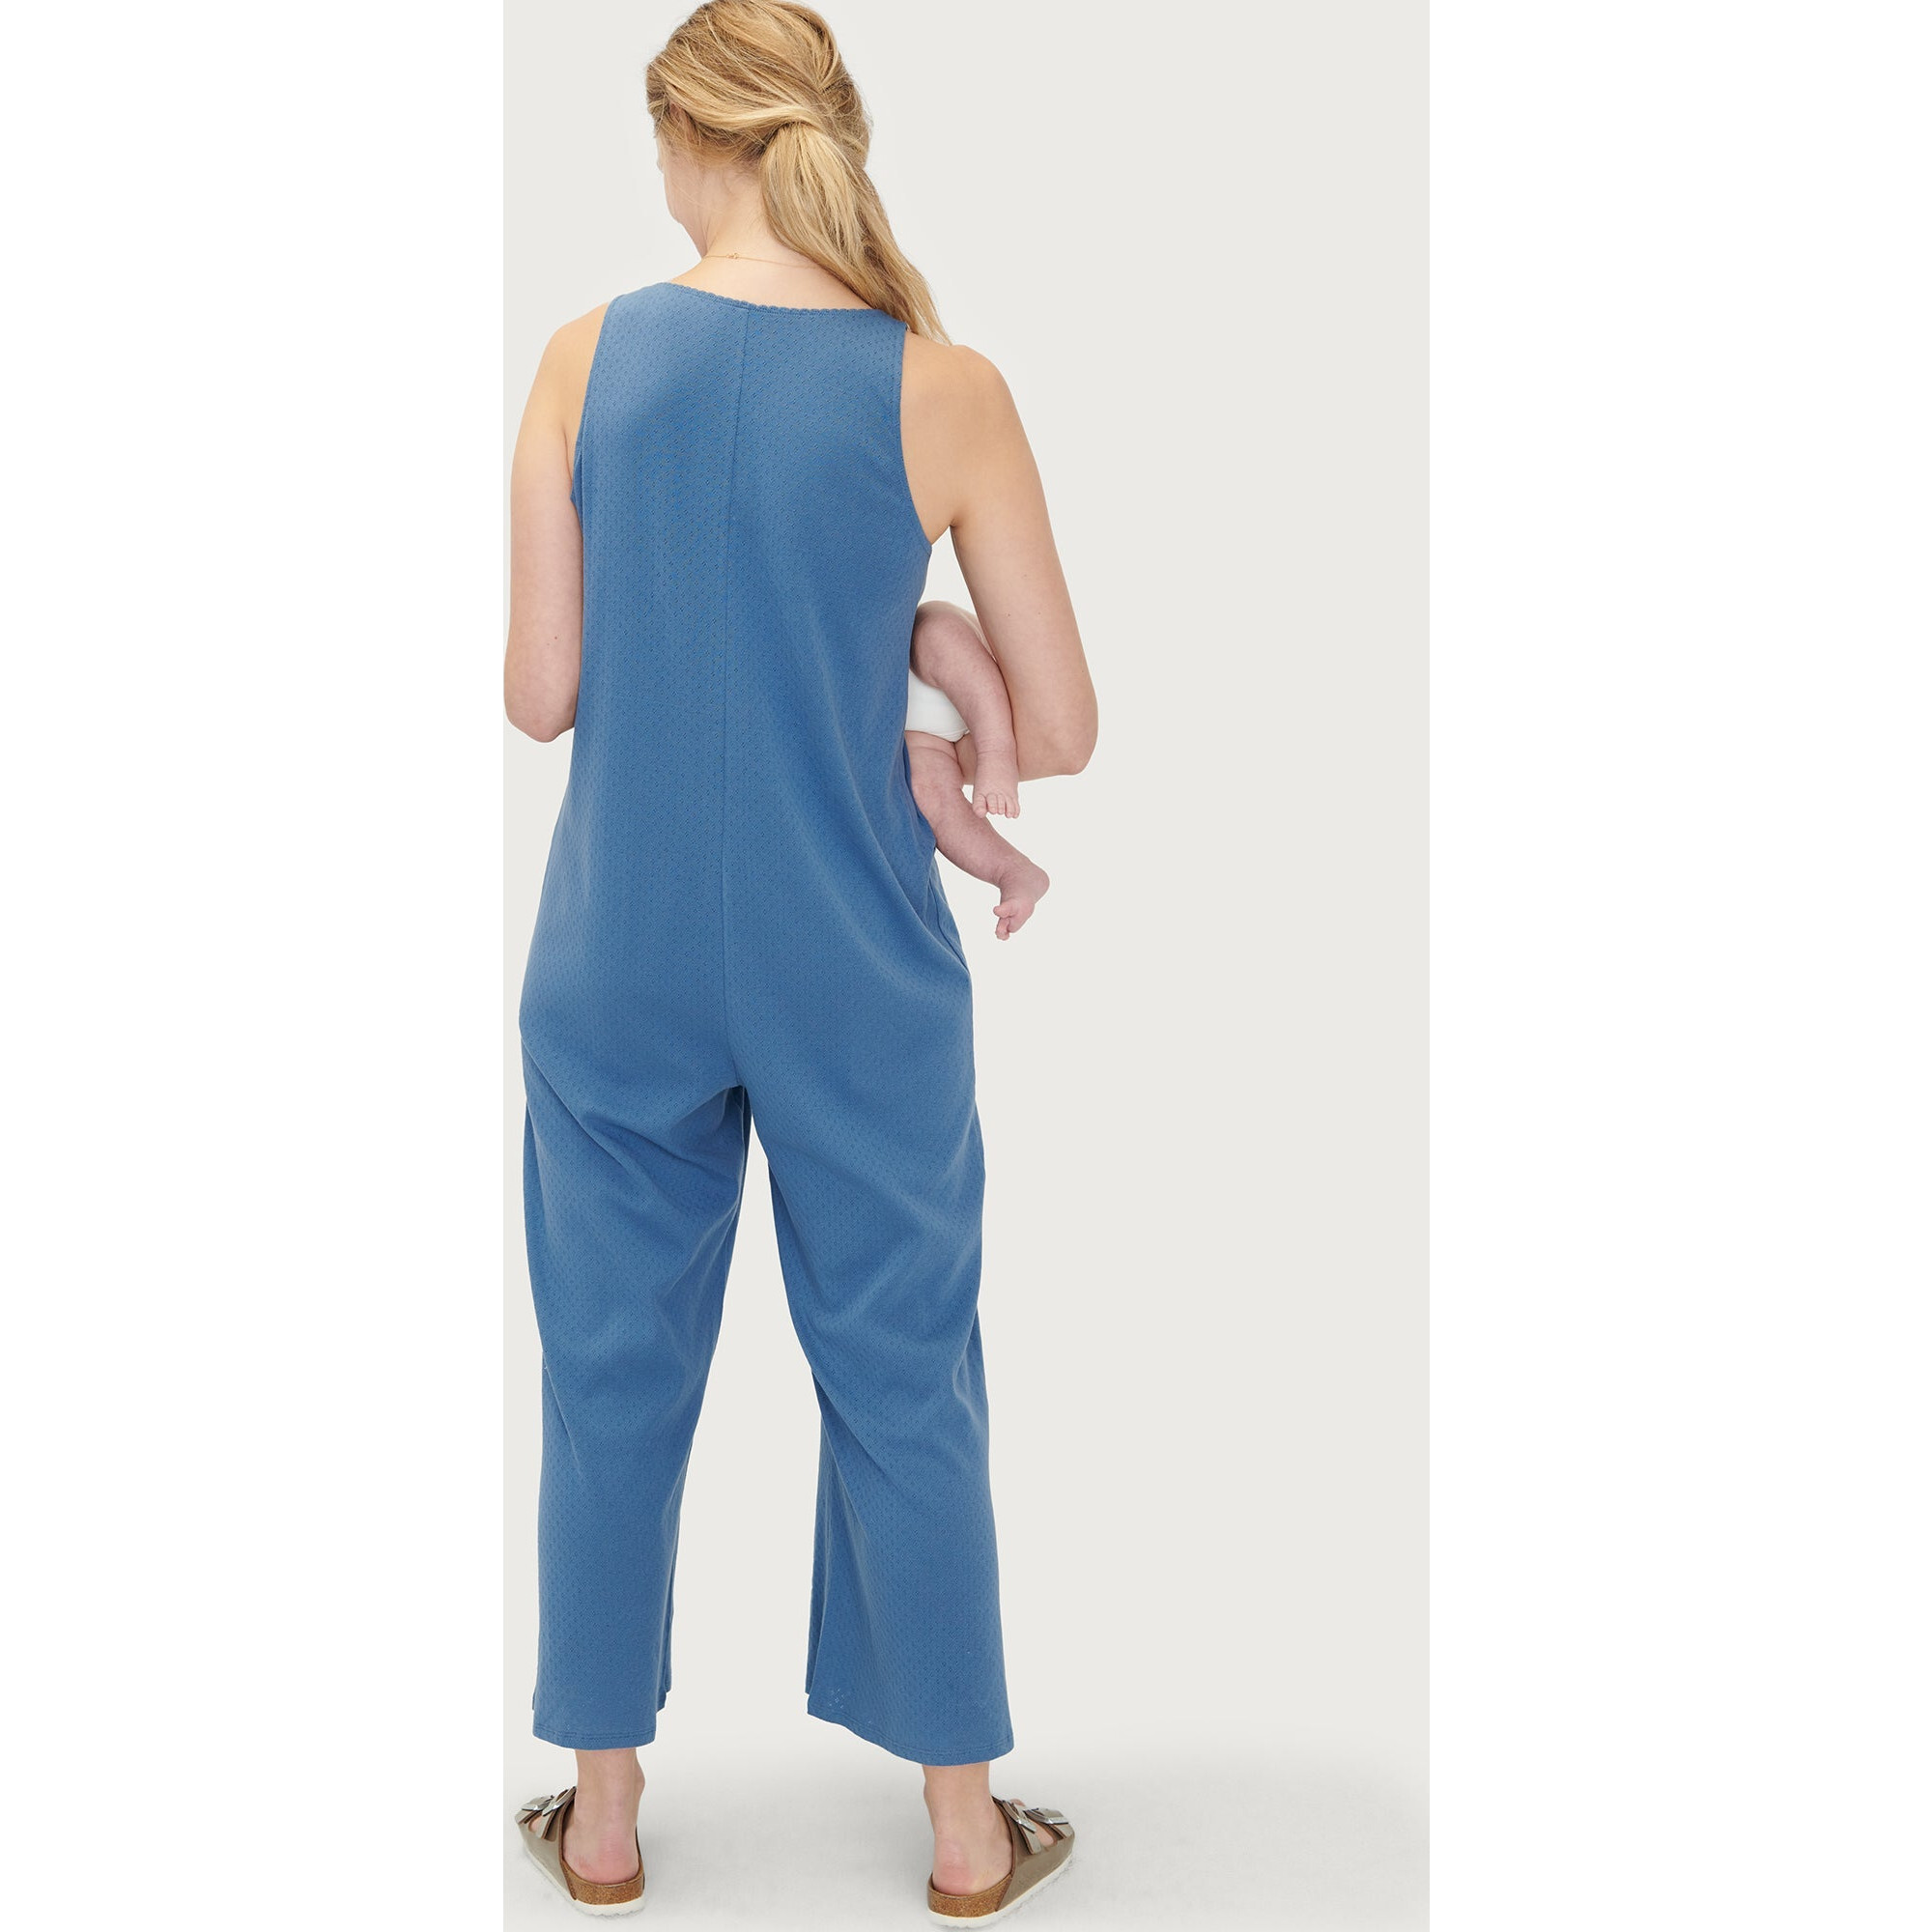 Denim Coverall Jumpsuit: Six Fall Outfits - Michelle Tomczak